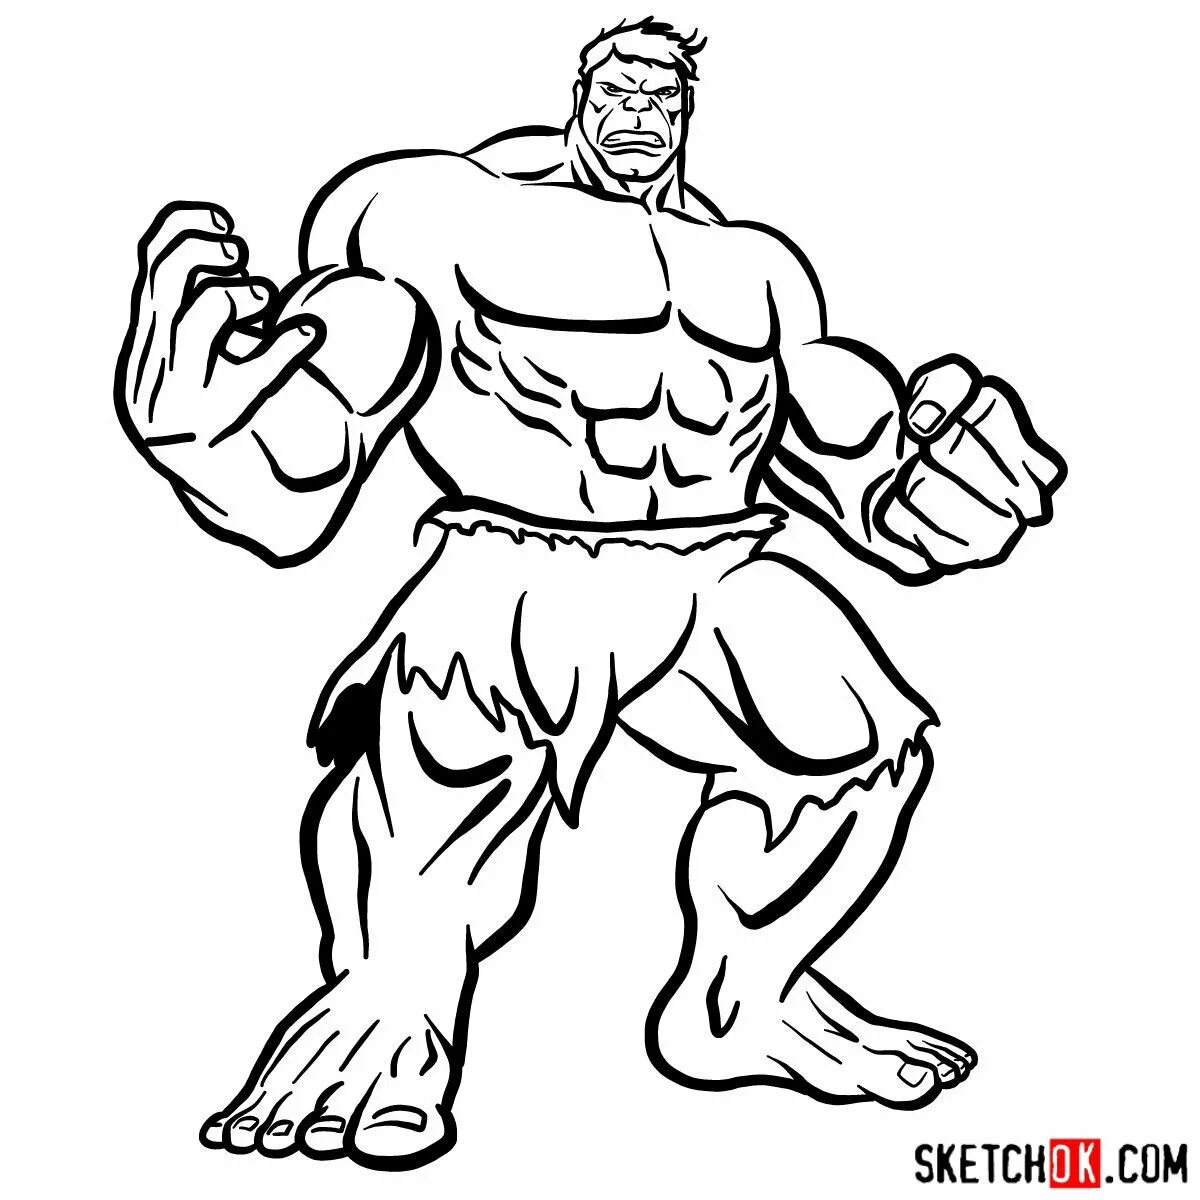 Outstanding Hulk Light coloring page